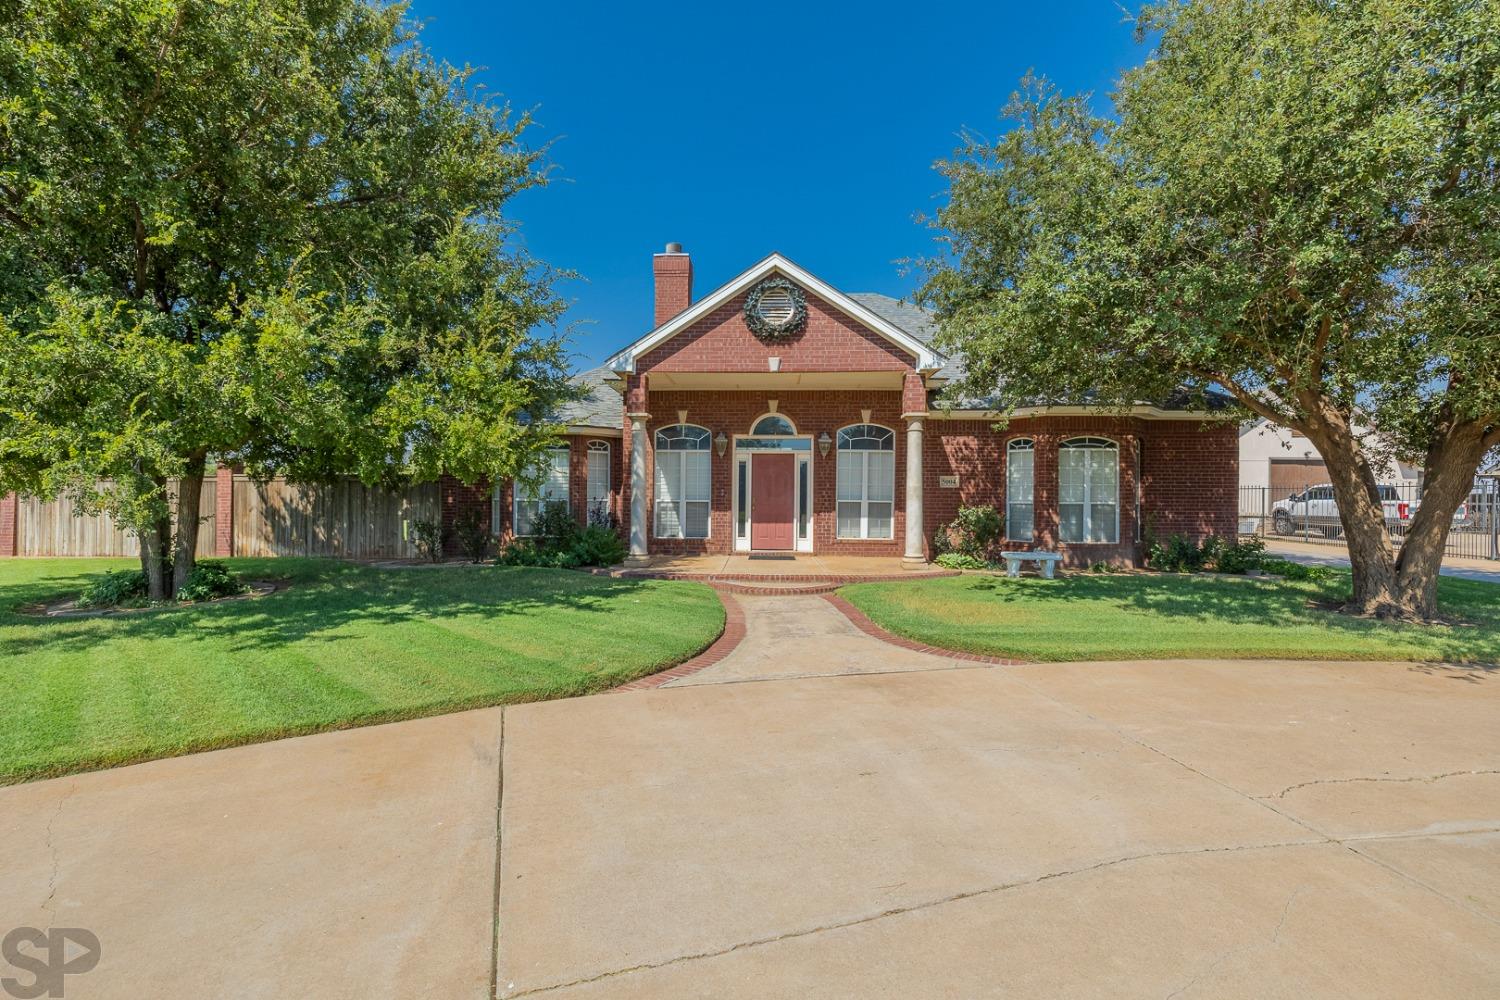 Welcome to this beautifully custom-designed, one-owner home in Llano Estates and Frenship ISD. The formal dining room greets you with hardwood floors, a wood-burning fireplace and natural light from the patio doors. The extensive kitchen features granite countertops, gas range, large island and doors to the exterior. You'll find plenty of use for the built-ins on either side of the living room fireplace. The spacious master suite includes his/her sinks, large closet and doors to the patio. Don't miss the basement wired for surround sound and upstairs bonus loft. Each bedroom features upper shelves and a built-in desk. Plantation shutters and crown molding throughout. Enjoy the central, covered patio with access from the dining room, living room and master bedroom. There's plenty of room in the 3-car garage with built-in work bench, cabinets and florescent shop lights. Exterior painted in September 2023. The corner lot provides more than 12,000 feet of fenced backyard!